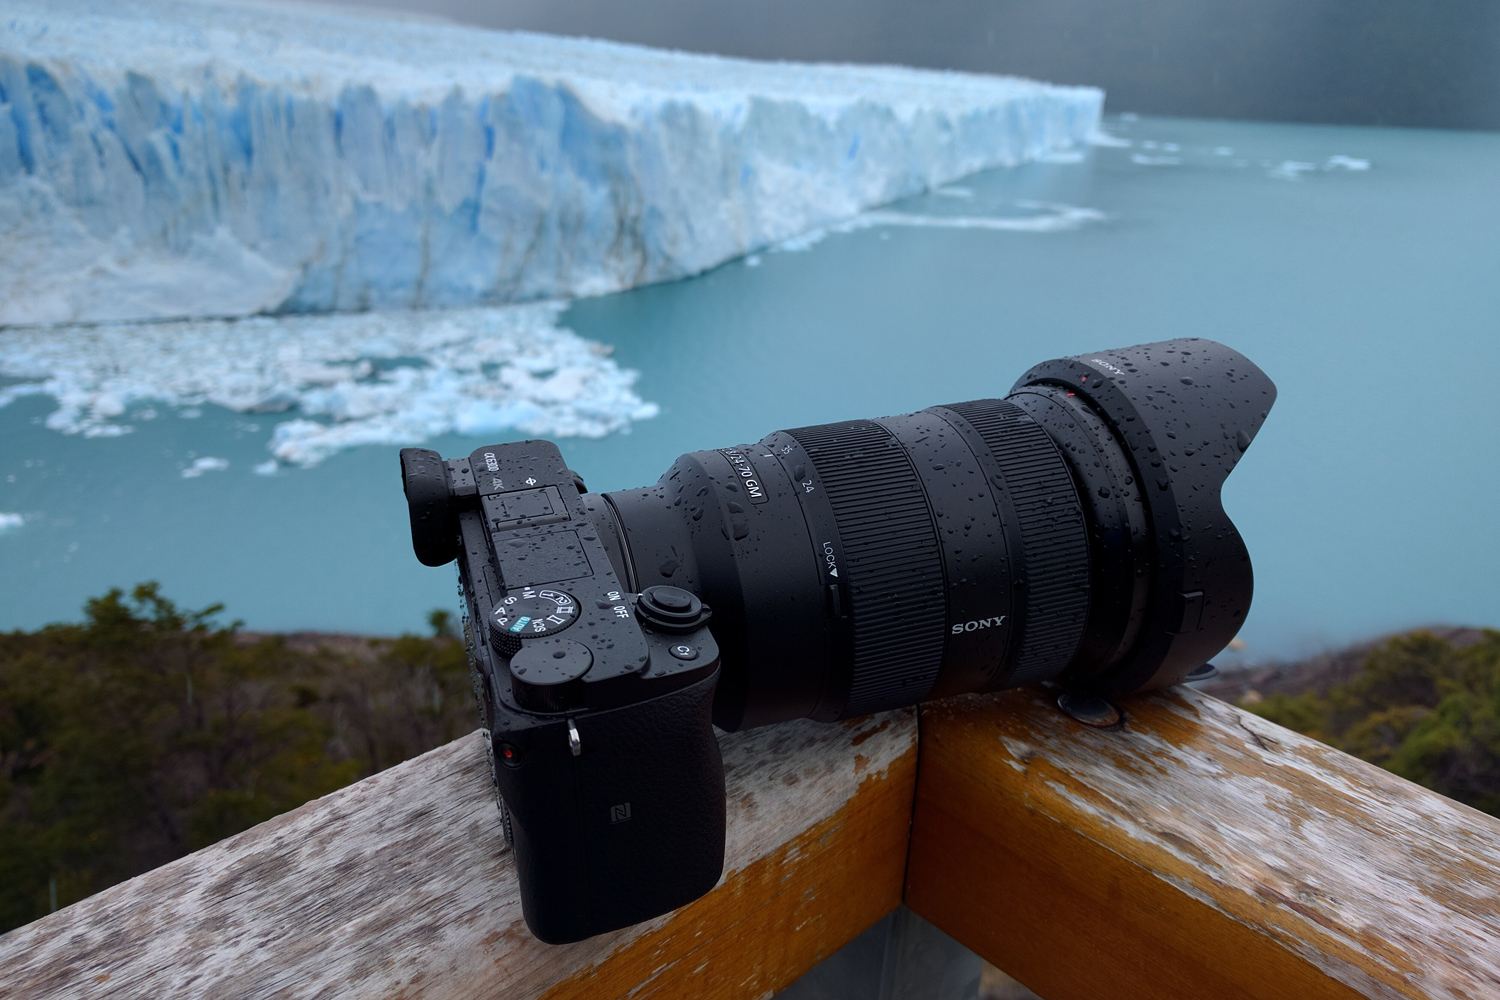 Sony a6300 handling a little freezing rain in Patagonia